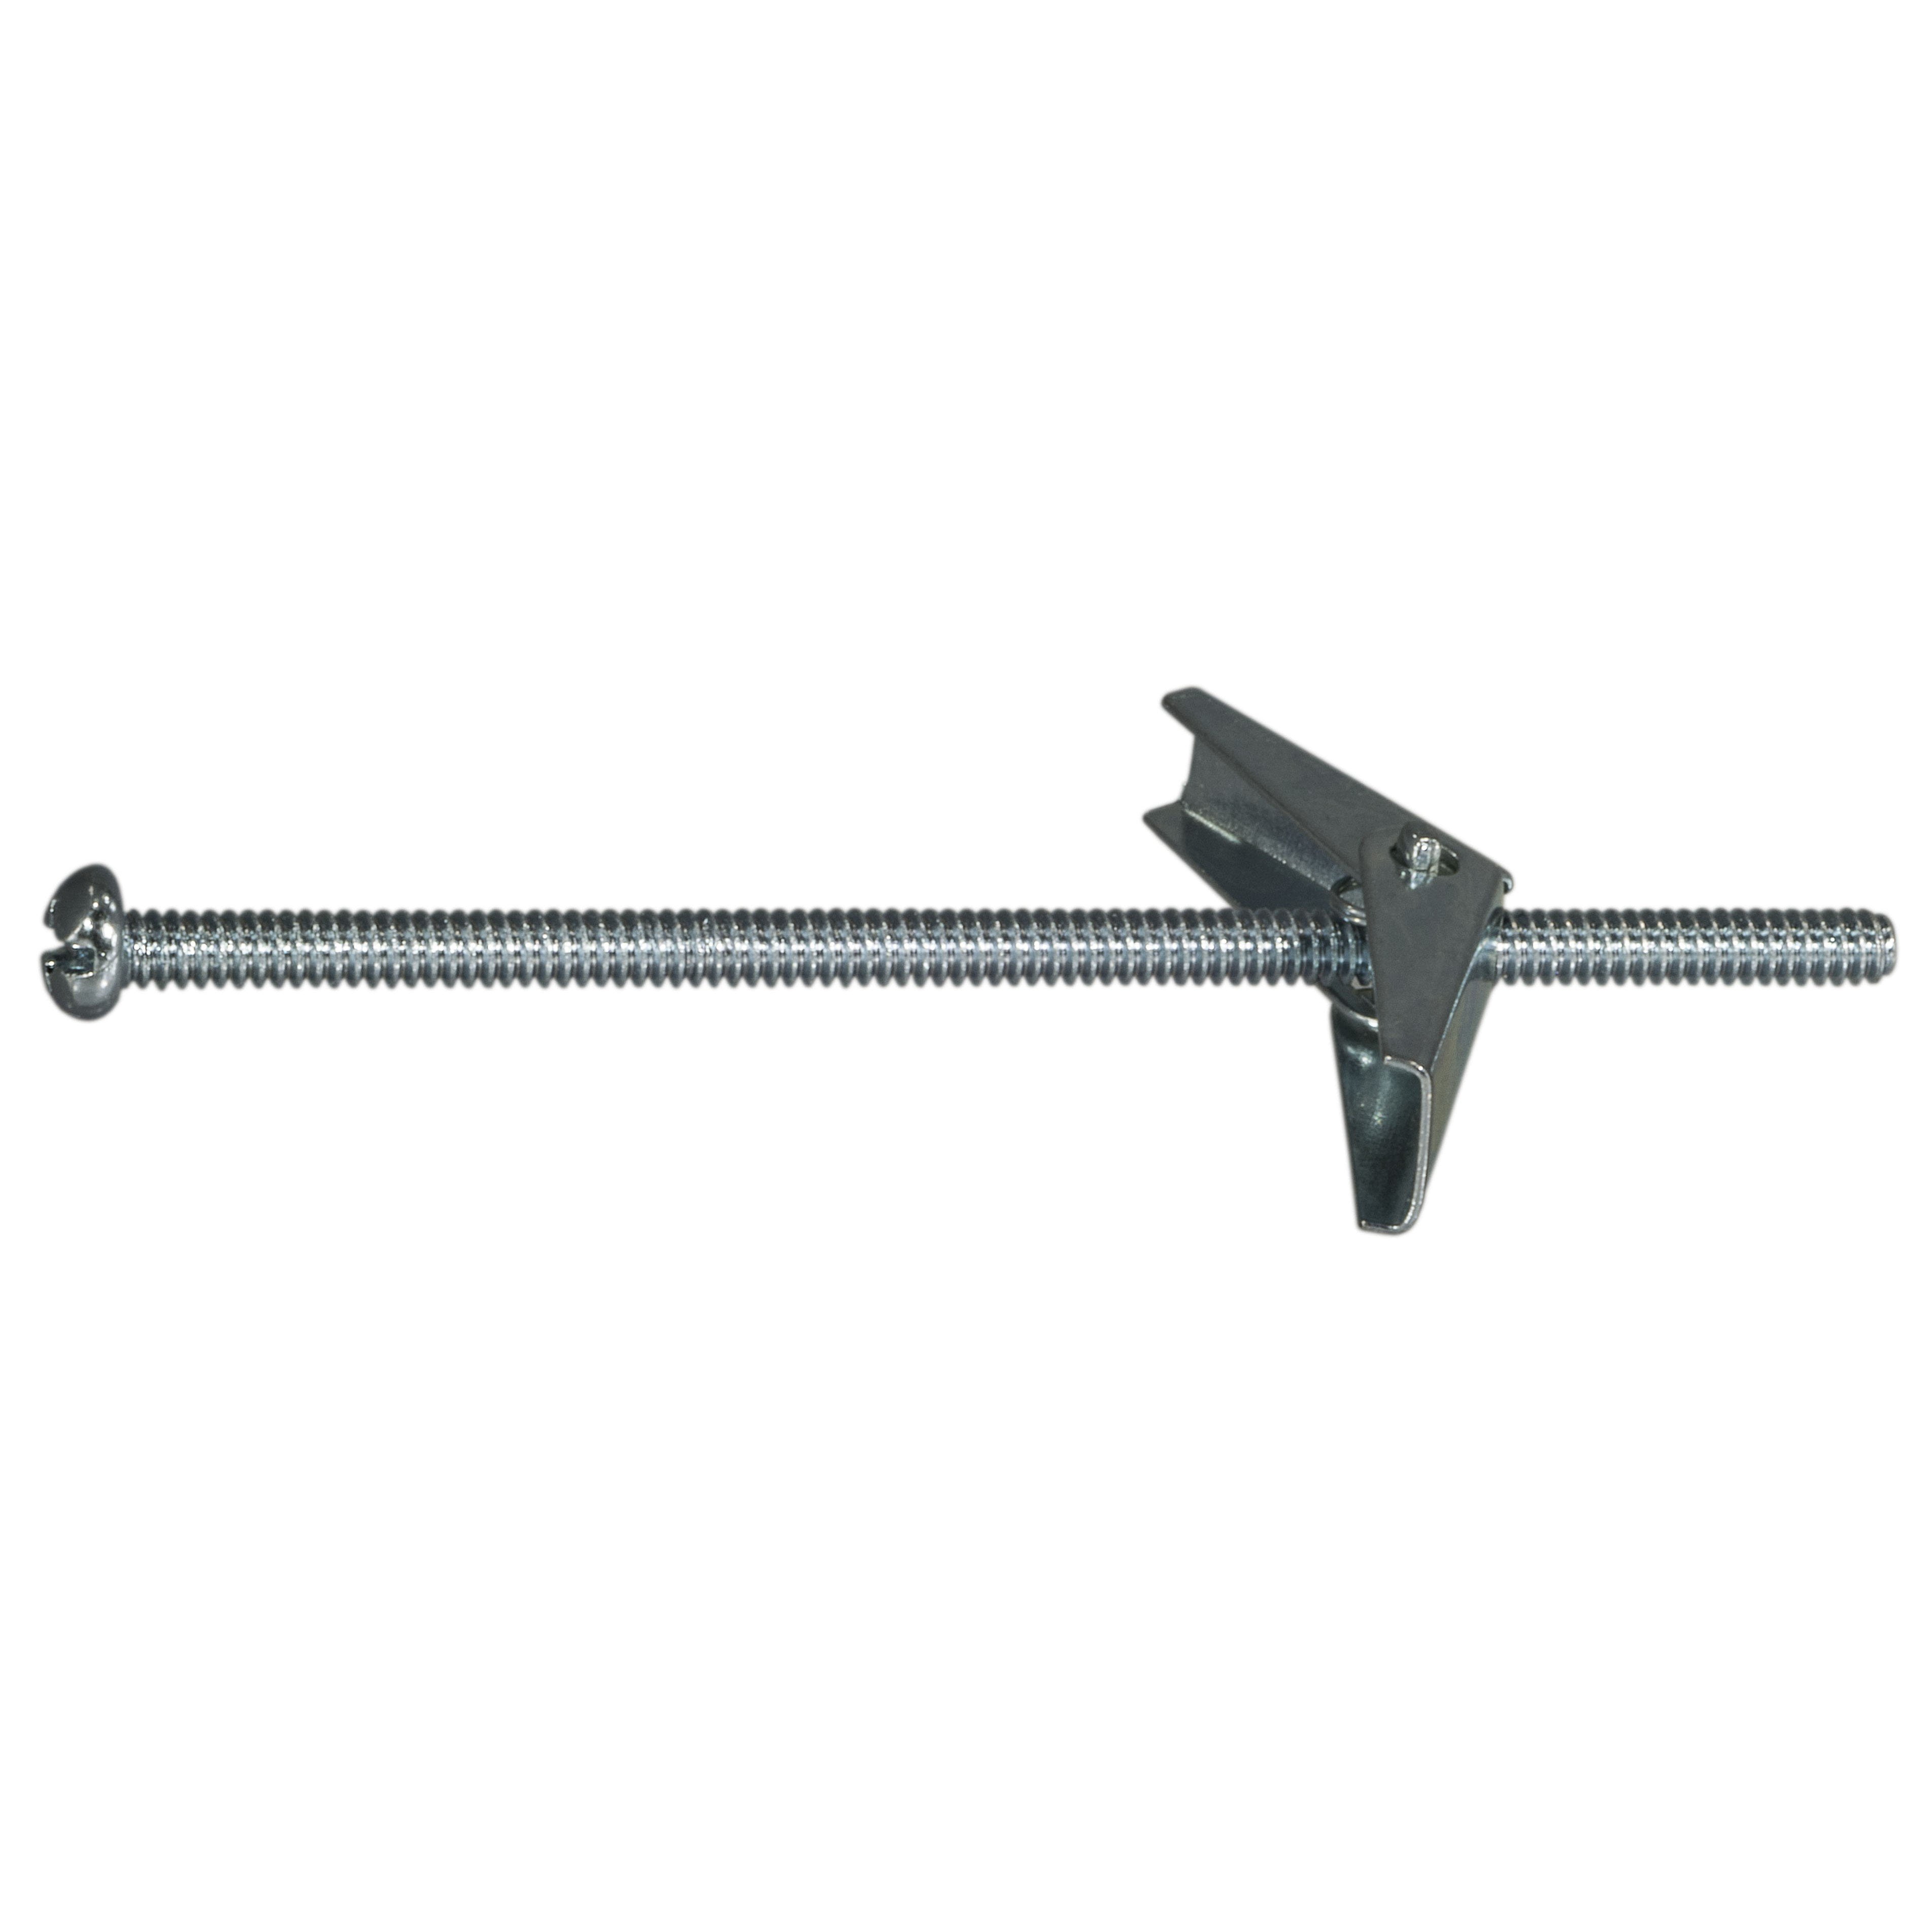 Hollow Wall Anchors 1/8" x 2" with Truss-Head Combo Drive Screw Zinc Plated 15 